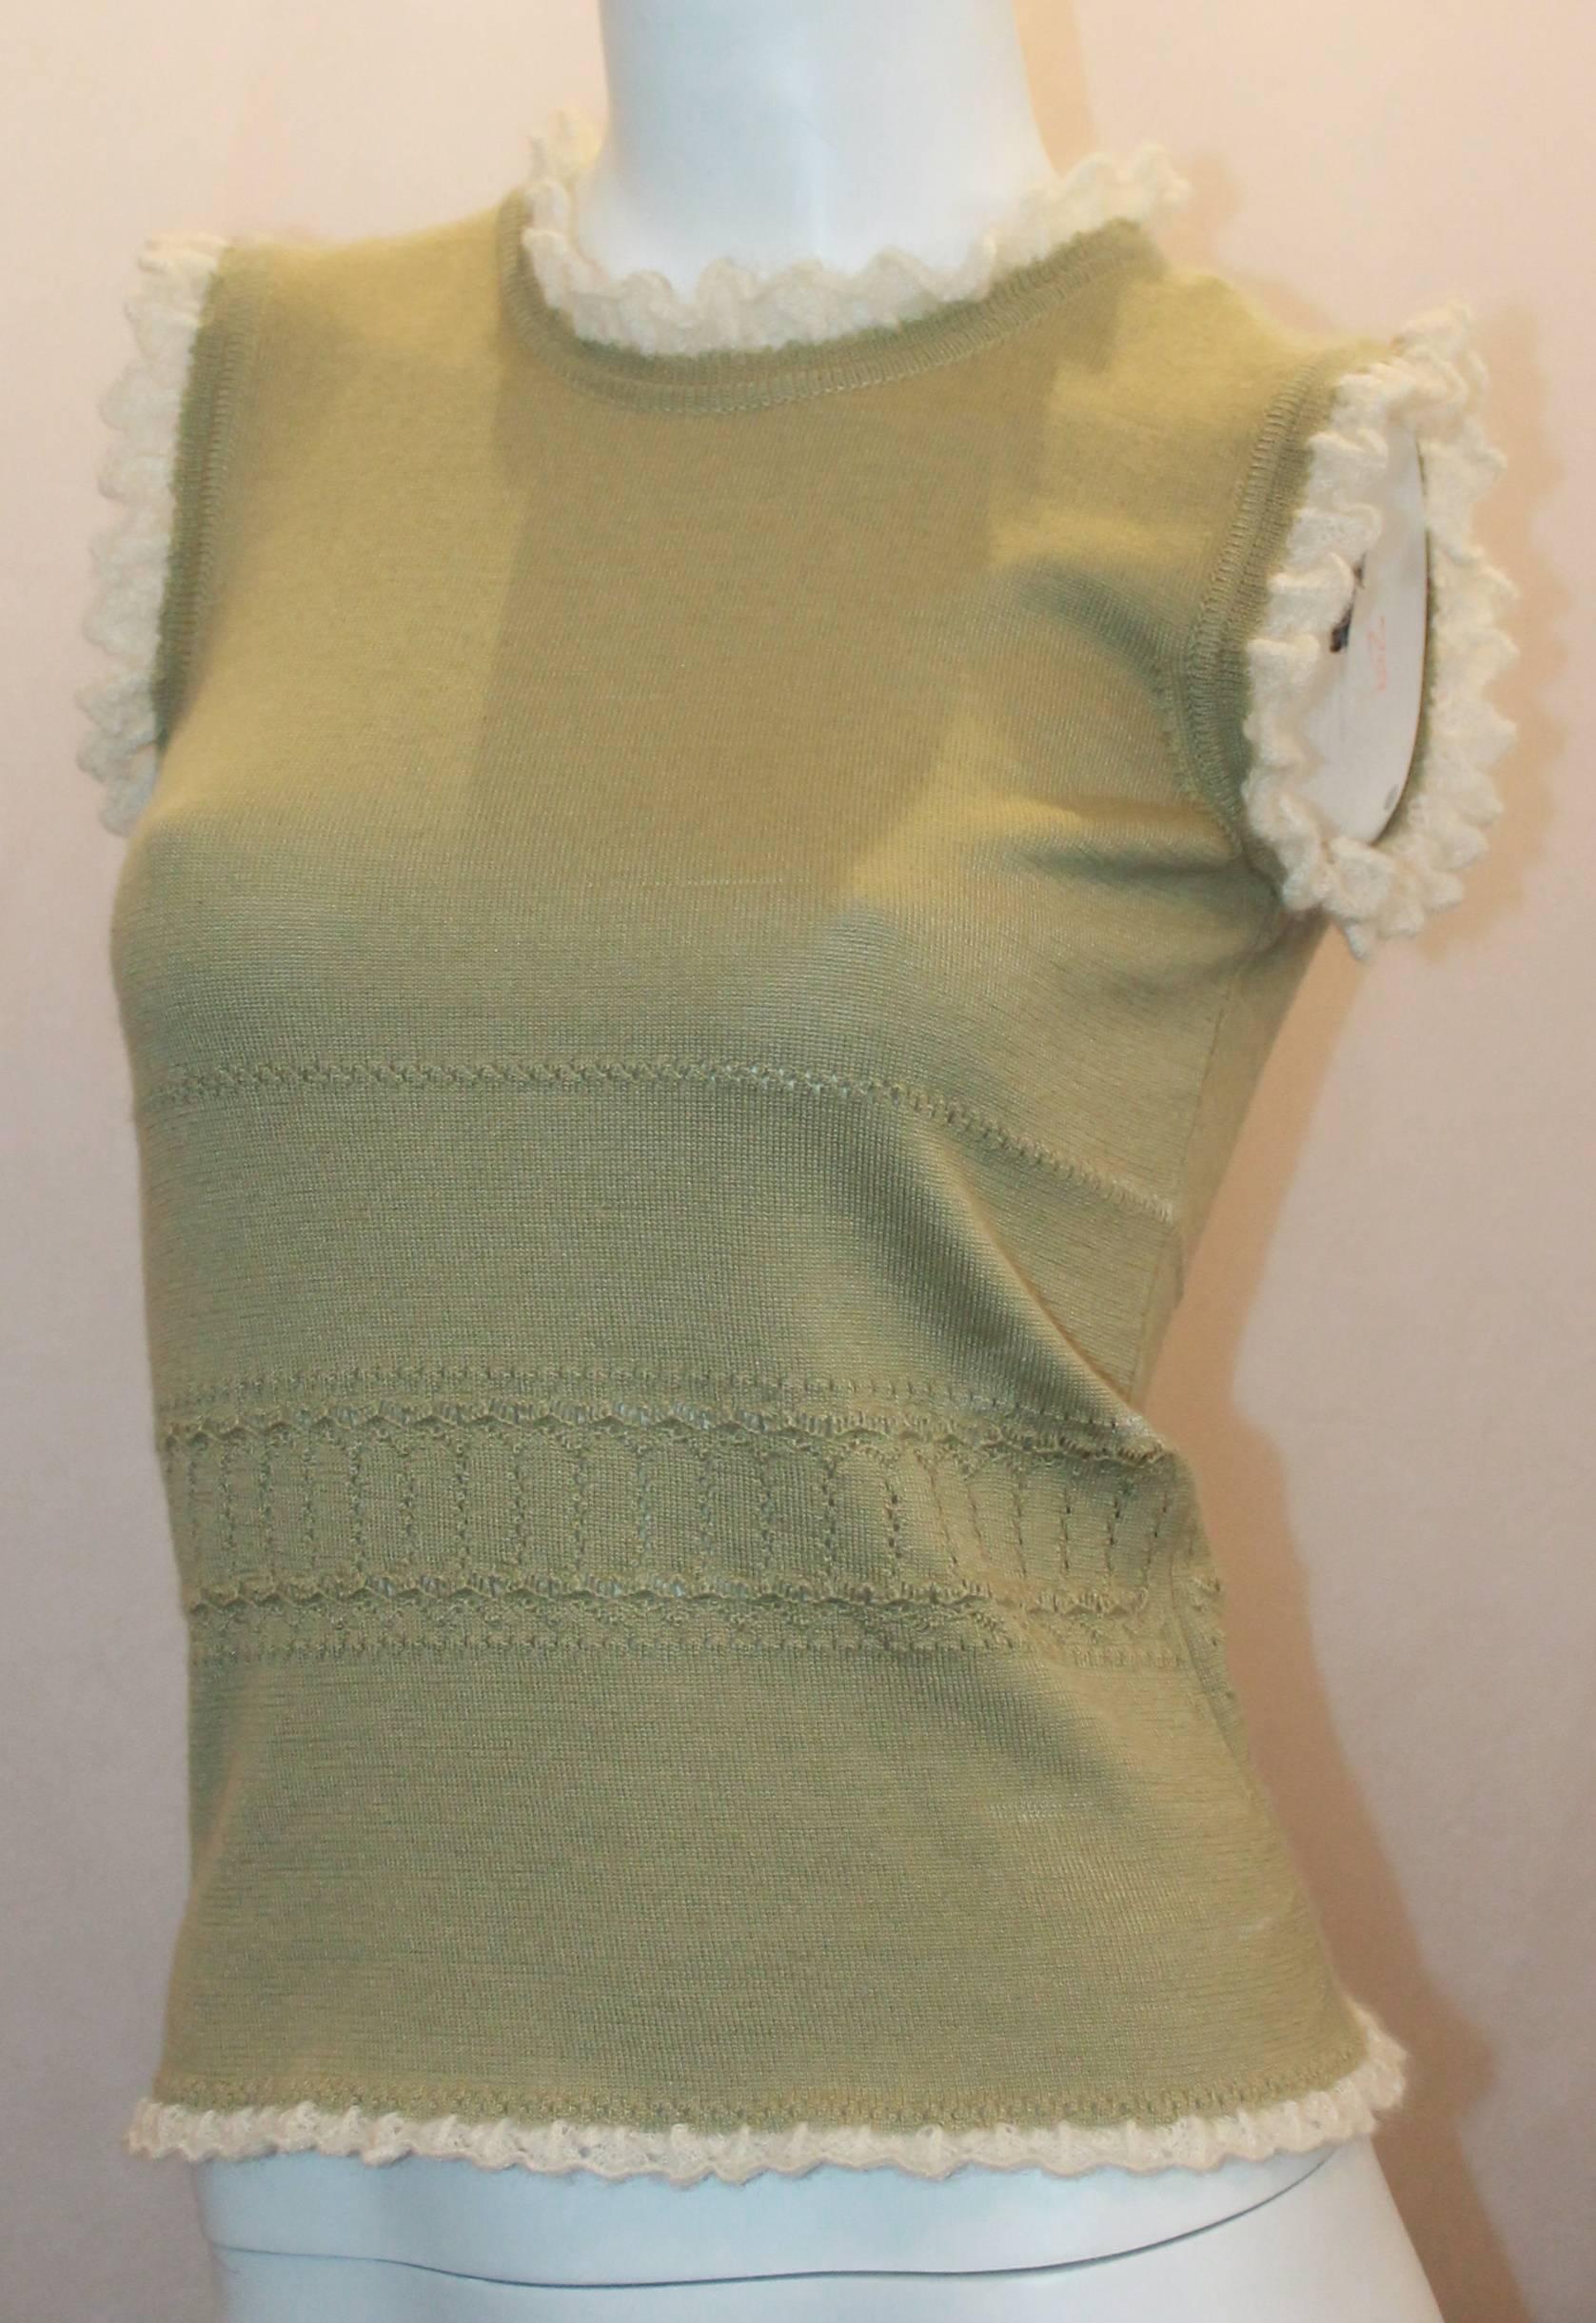 Oscar de la Renta Pastel Green Cashmere Sleeveless Top w/ Knit Ruffle Trim - S.  This lovely top is in excellent condition.  It features a lovely pastel green cashmere material, a feminine knit ruffle trim, a single pearl button on the back, and a